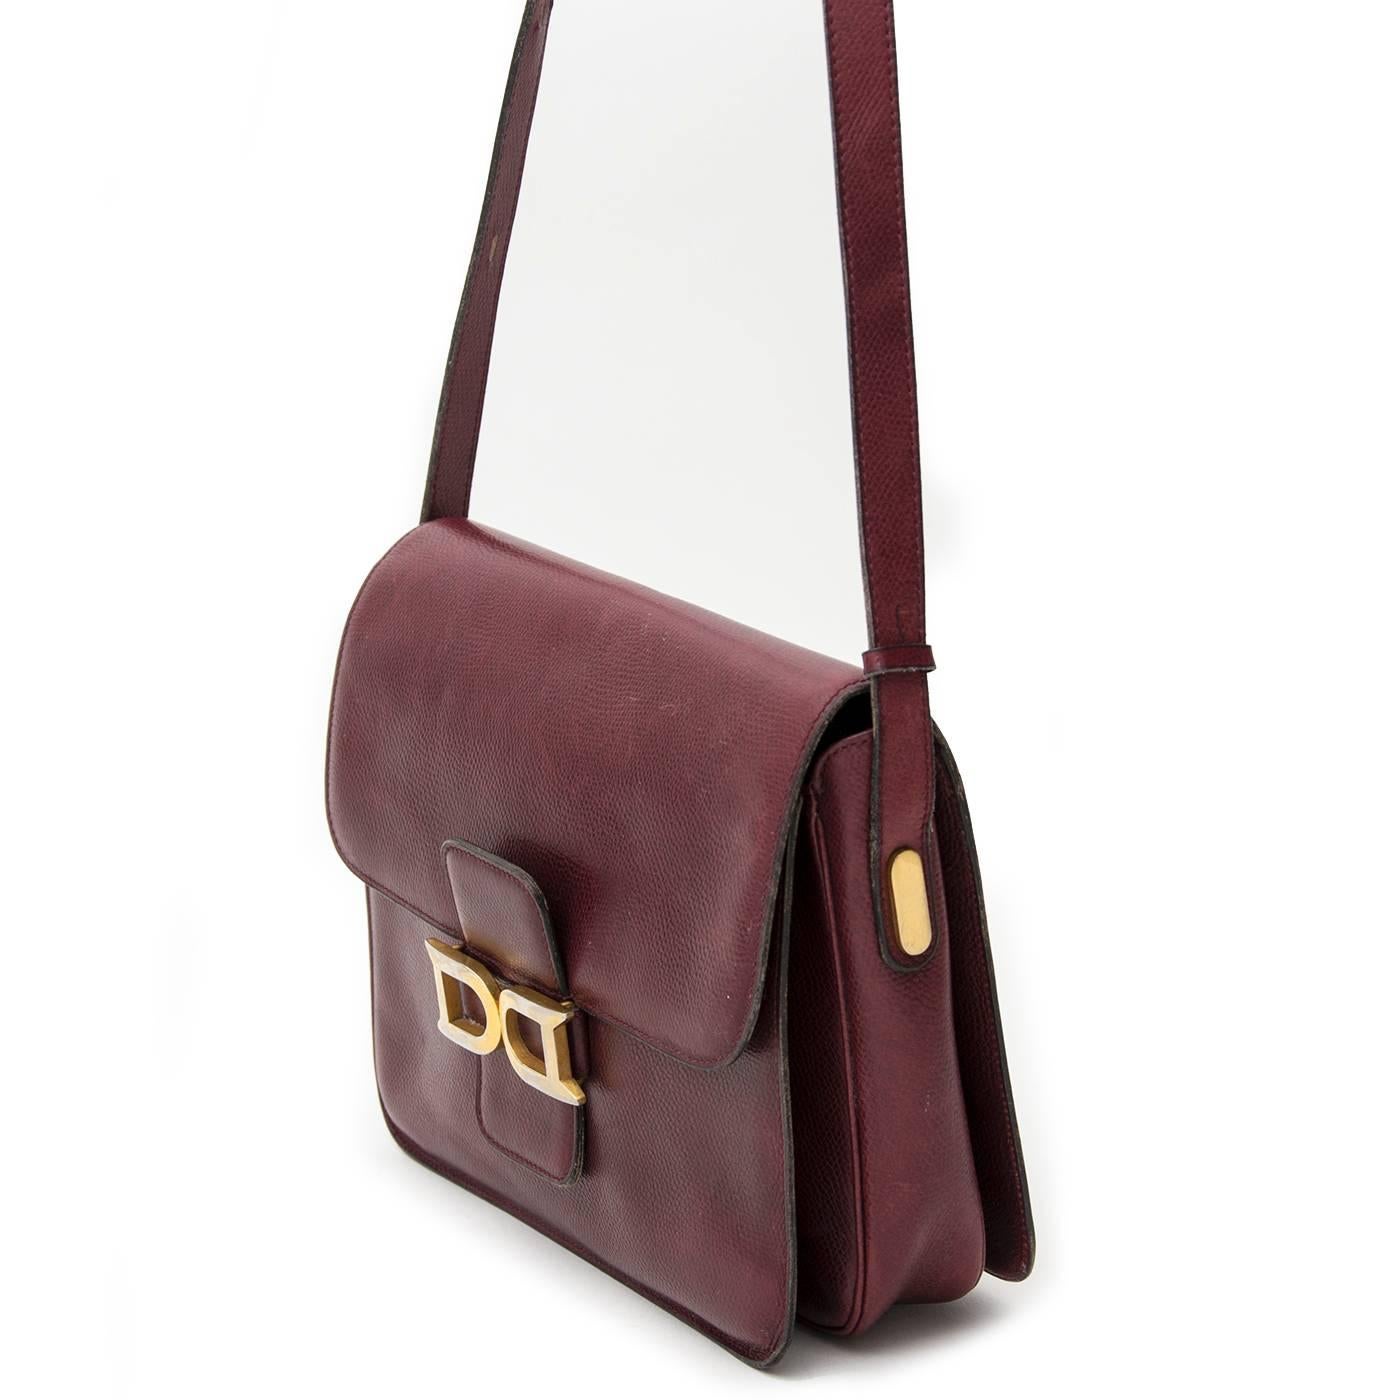 This classic Delvaux comes in an elegant burgundy colored leather and features a double golden D closure. The shoulder bag has an adjustable strap and is therefore easy to wear over the shoulder or crossbody. The interior of this simple beauty is